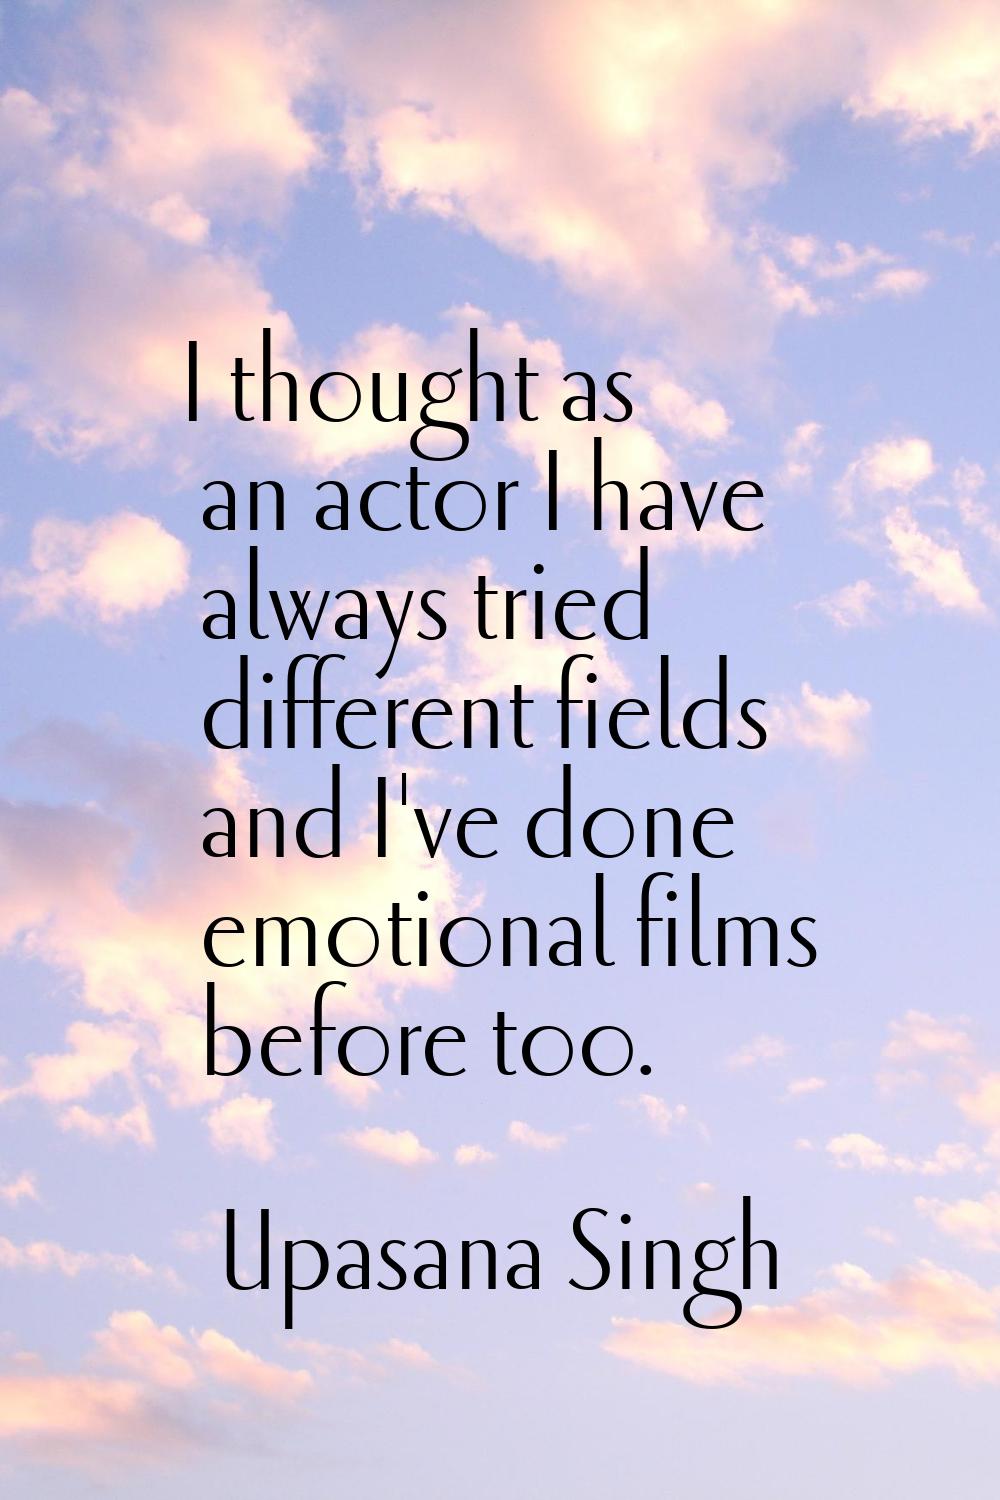 I thought as an actor I have always tried different fields and I've done emotional films before too